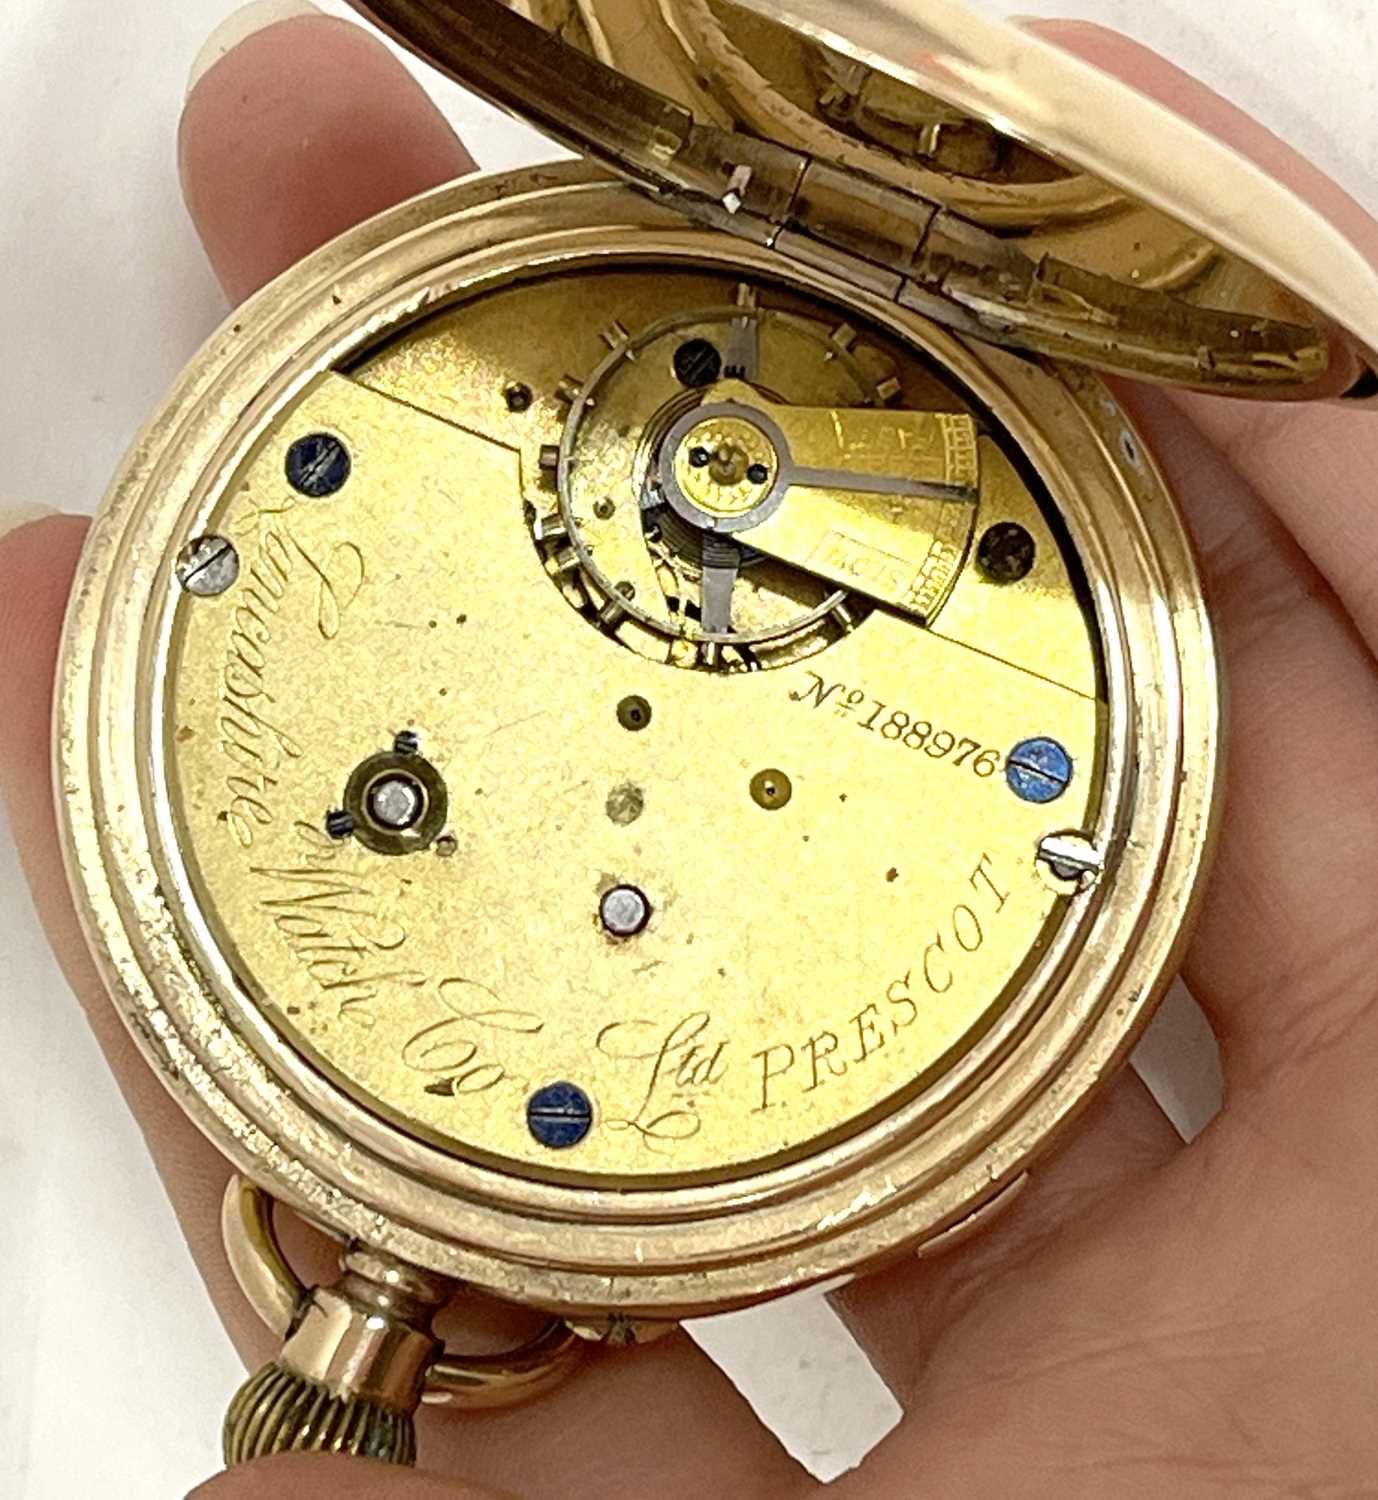 A rolled gold Lancashire Watch Company pocket watch, the watch has a manually crown wound movement - Image 7 of 7